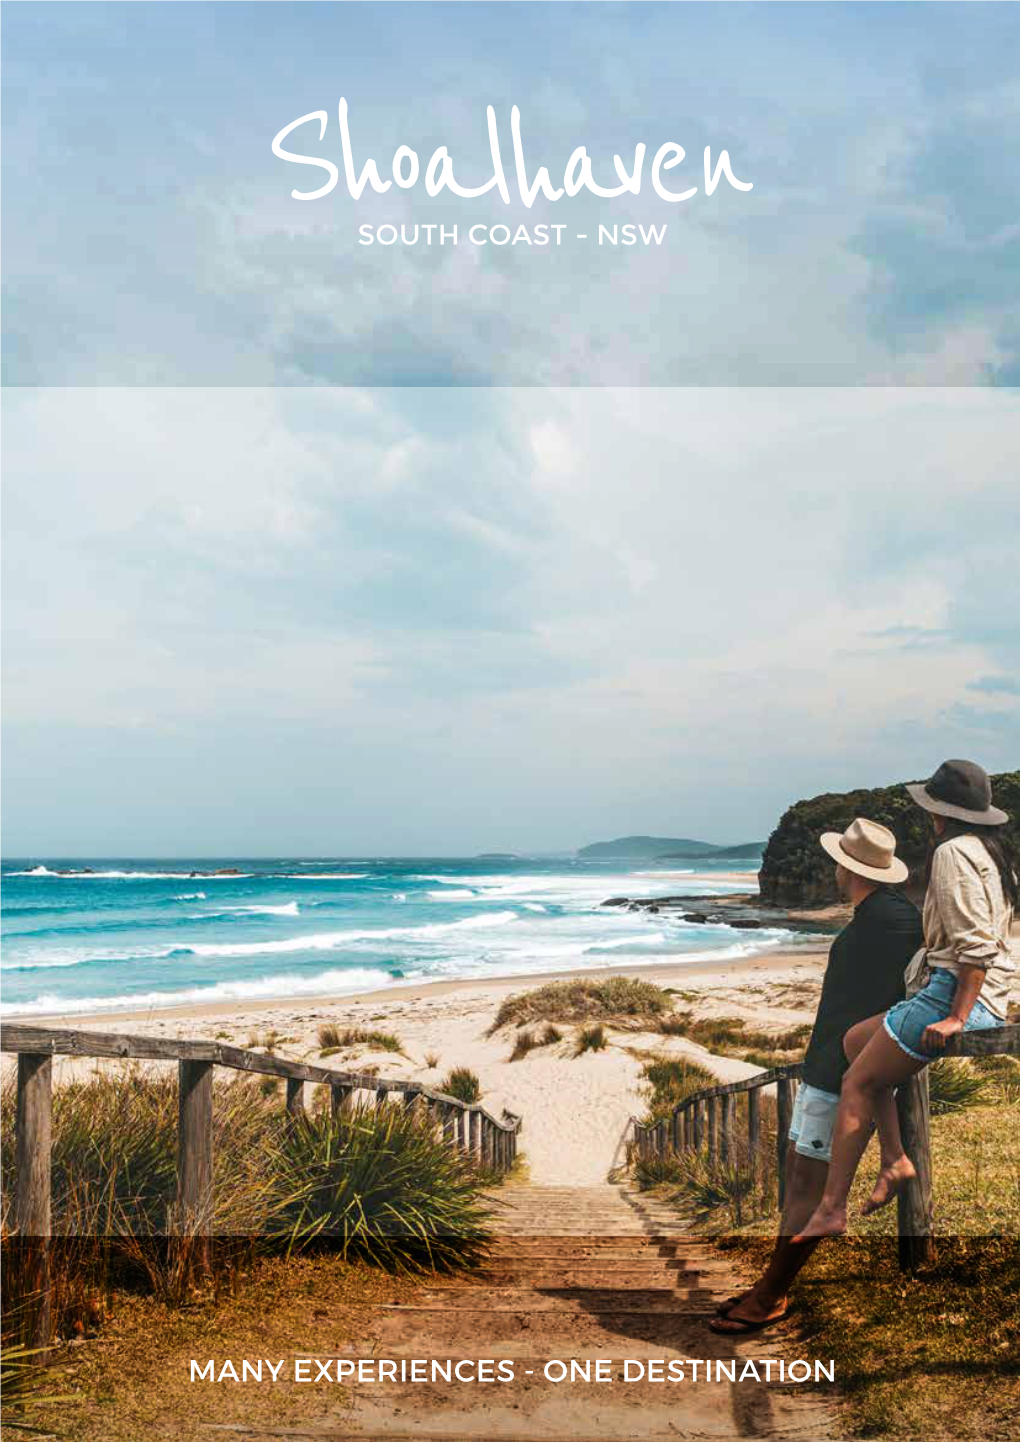 MANY EXPERIENCES - ONE DESTINATION 2 | 2020 Shoalhaven Visitor Guide 0448 288 918